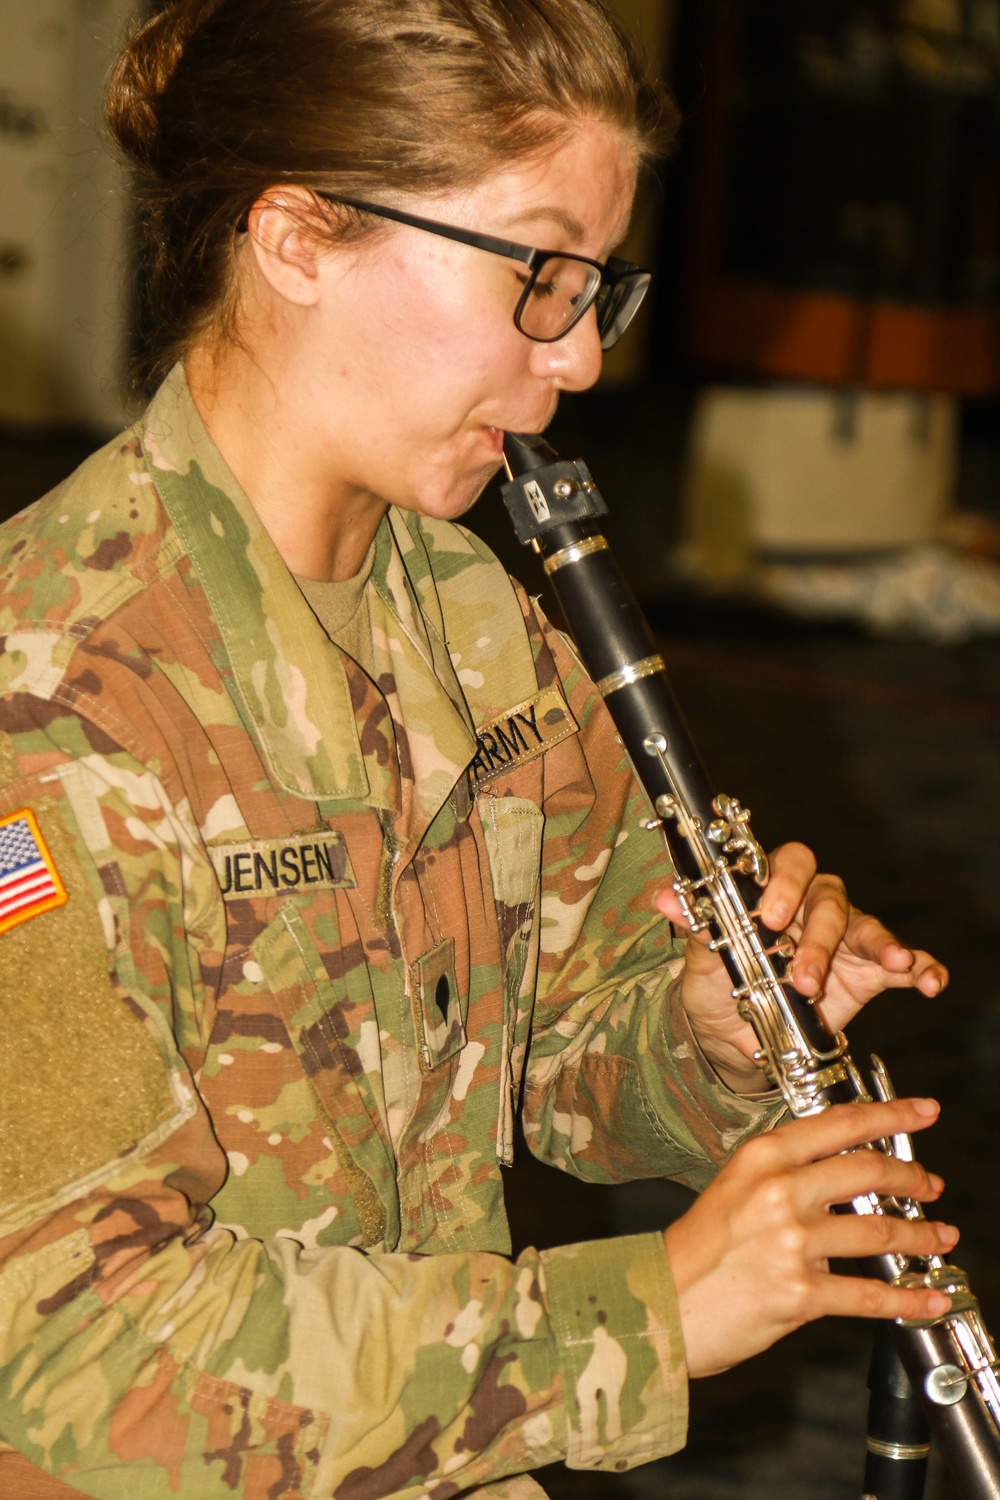 82nd Airborne Division's woodwind quintet plays at Throckmorton Library